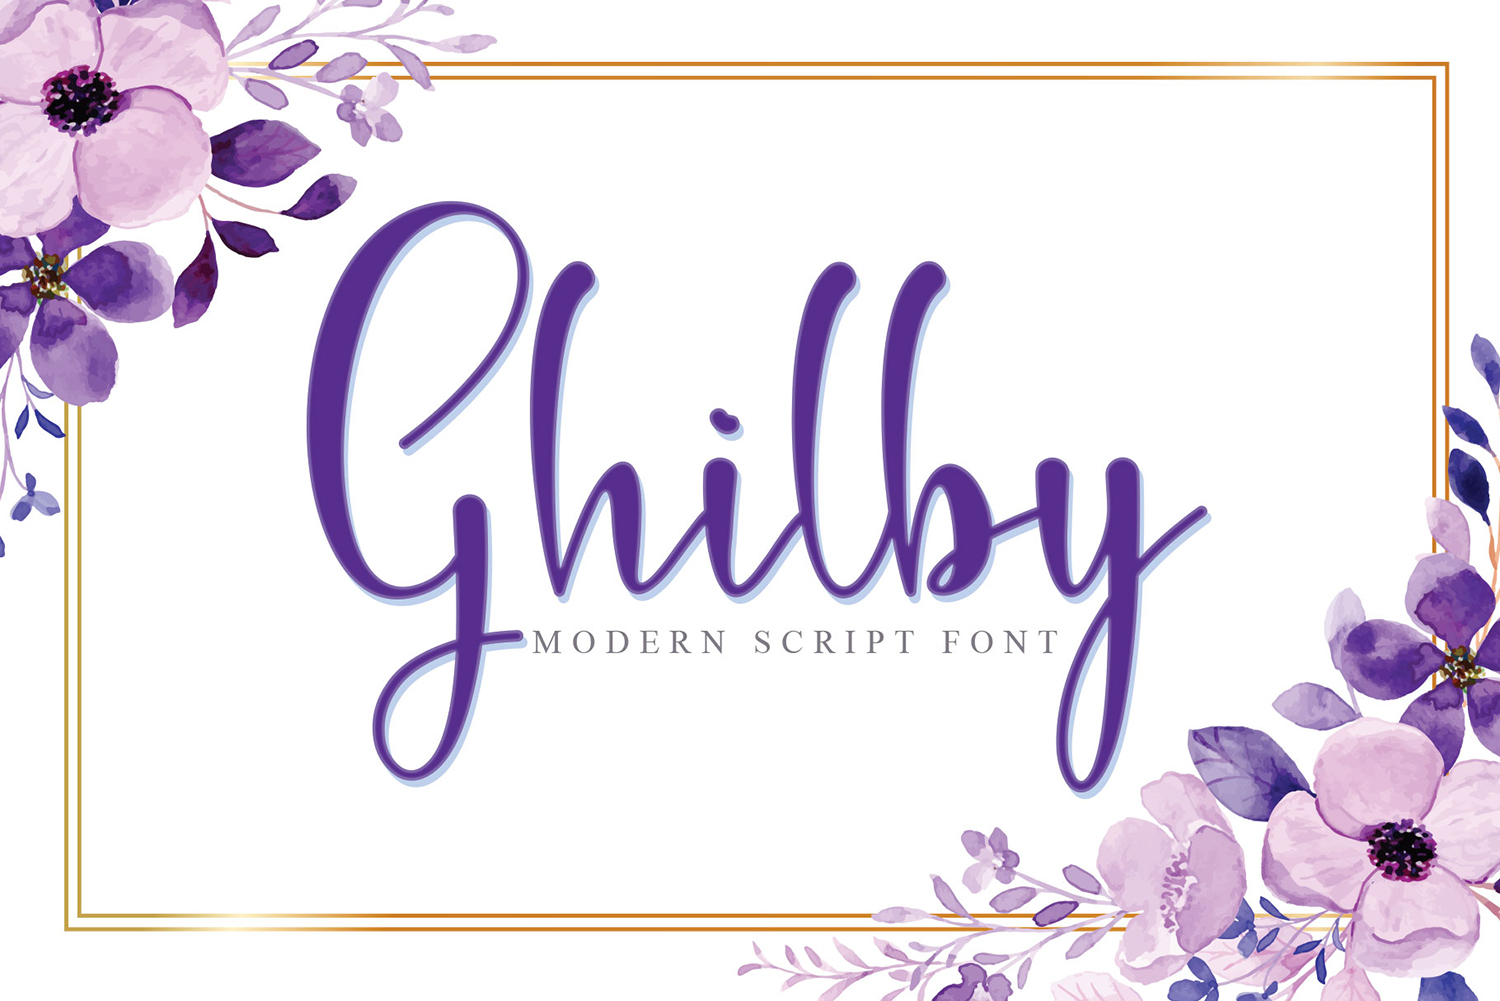 Ghilby Free Font